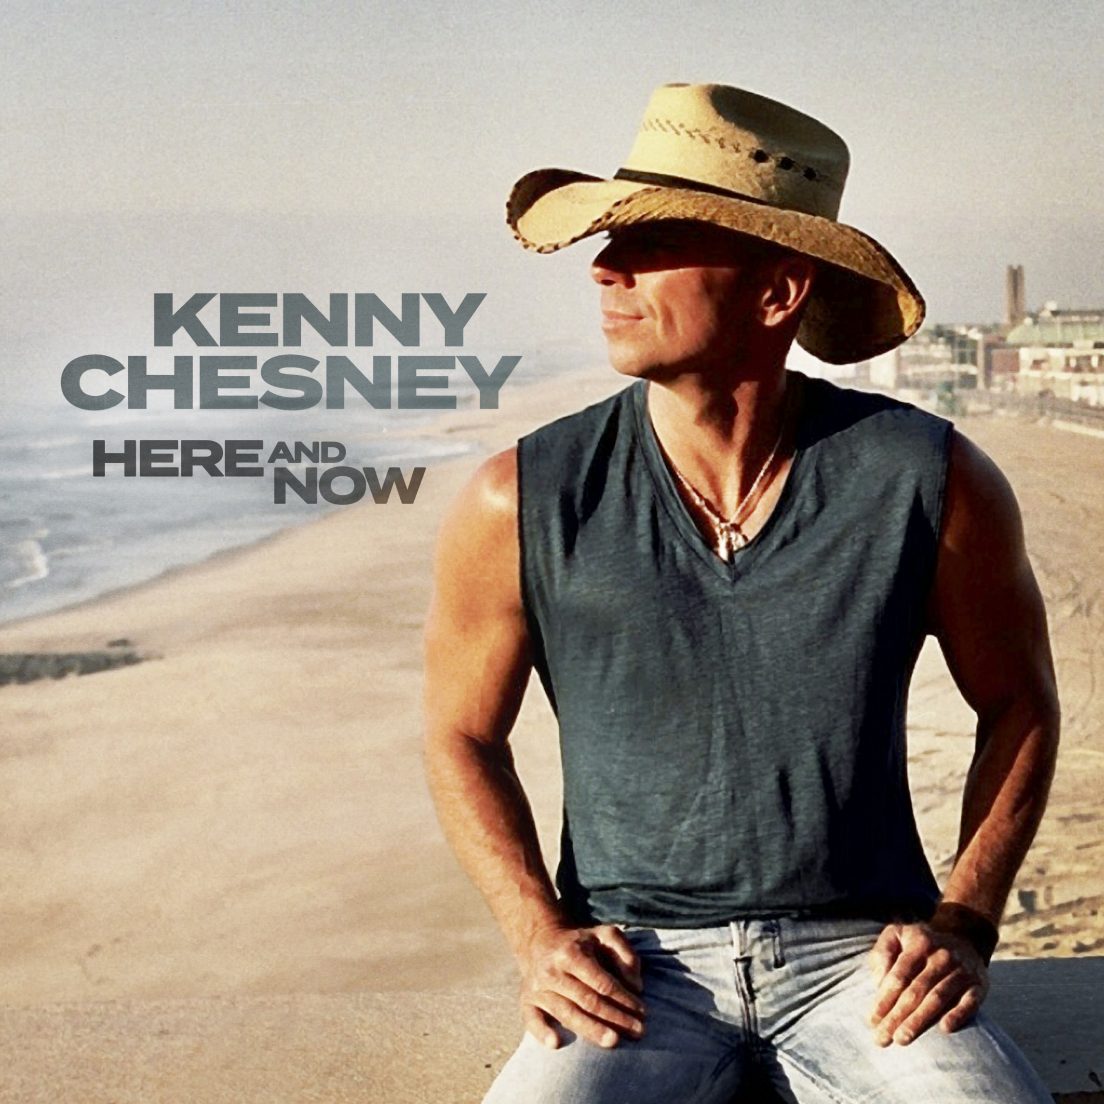 Kenny Chesney's "Here And Now" Projected For 210220K US Sales, 220